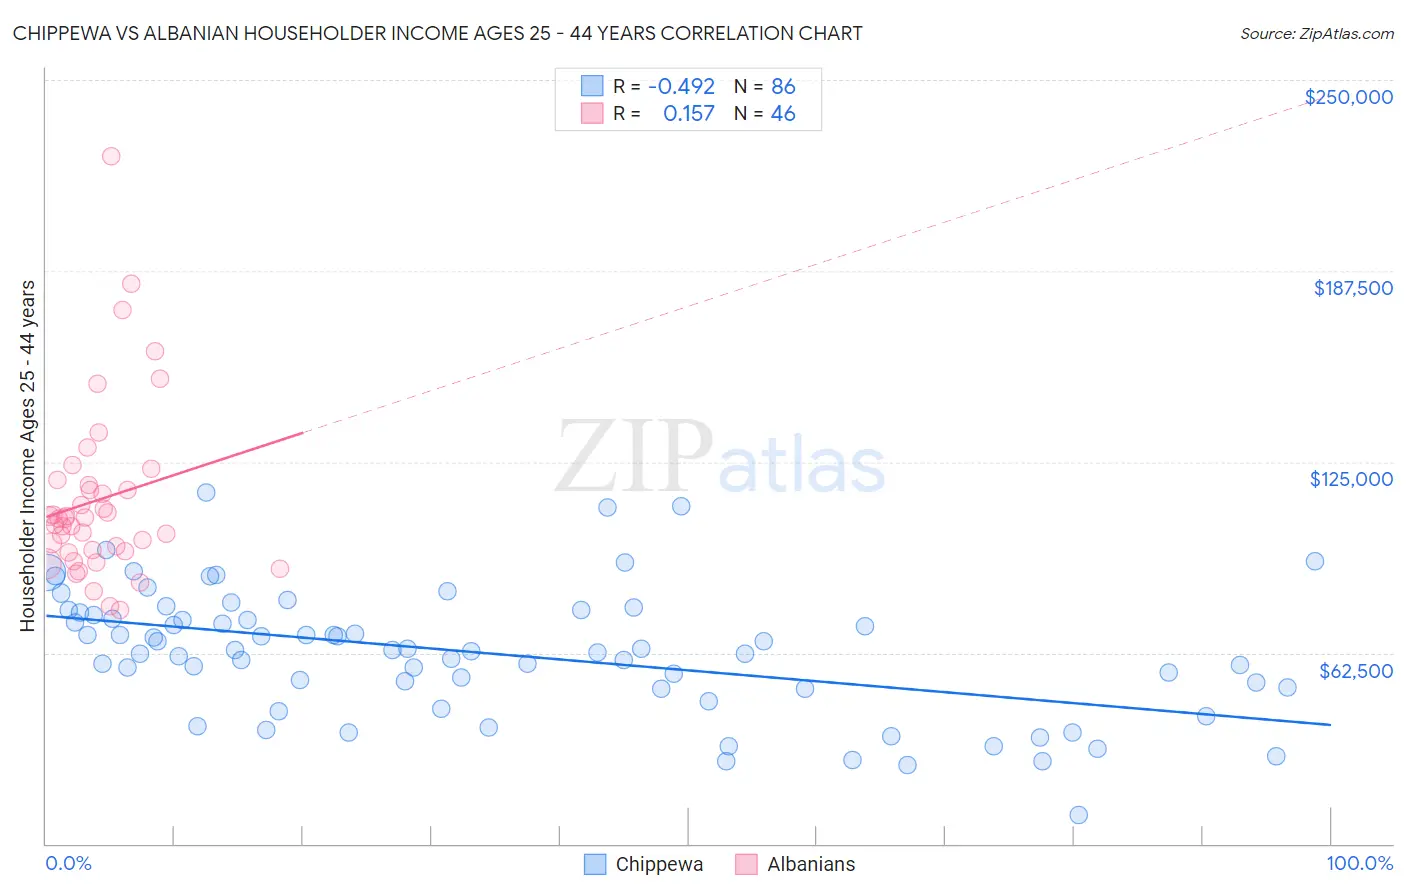 Chippewa vs Albanian Householder Income Ages 25 - 44 years